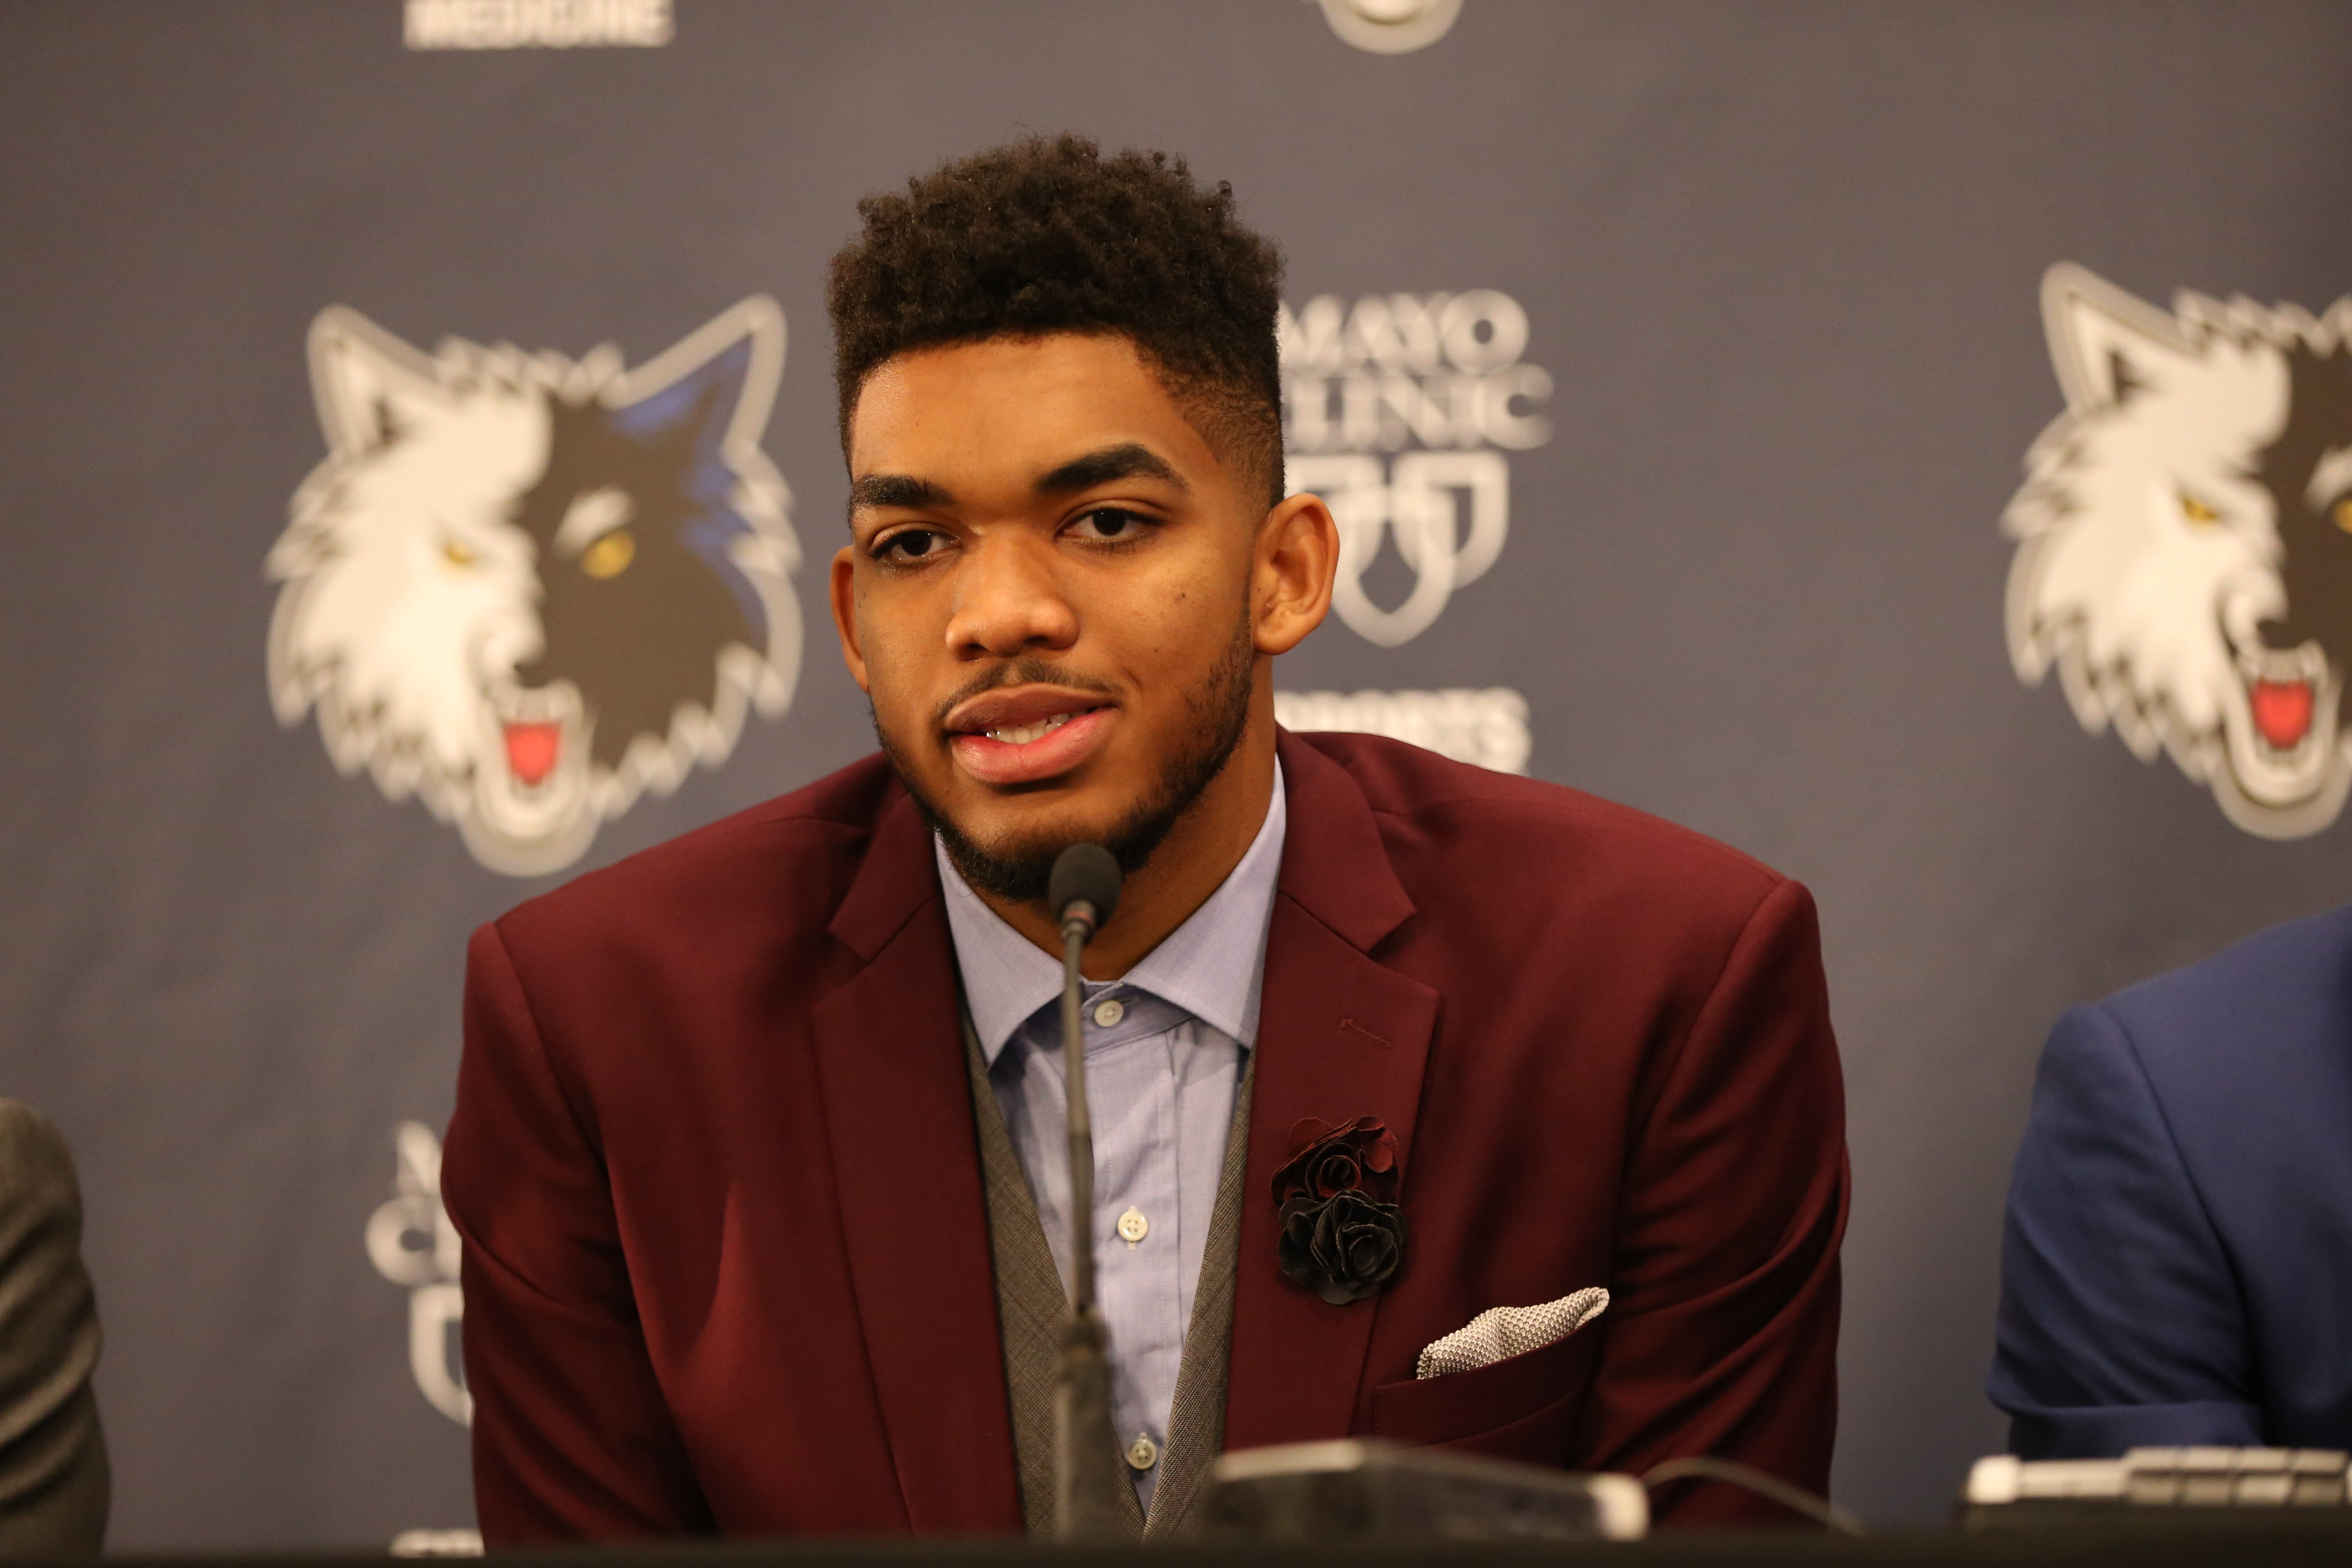 Karl-Anthony Towns.